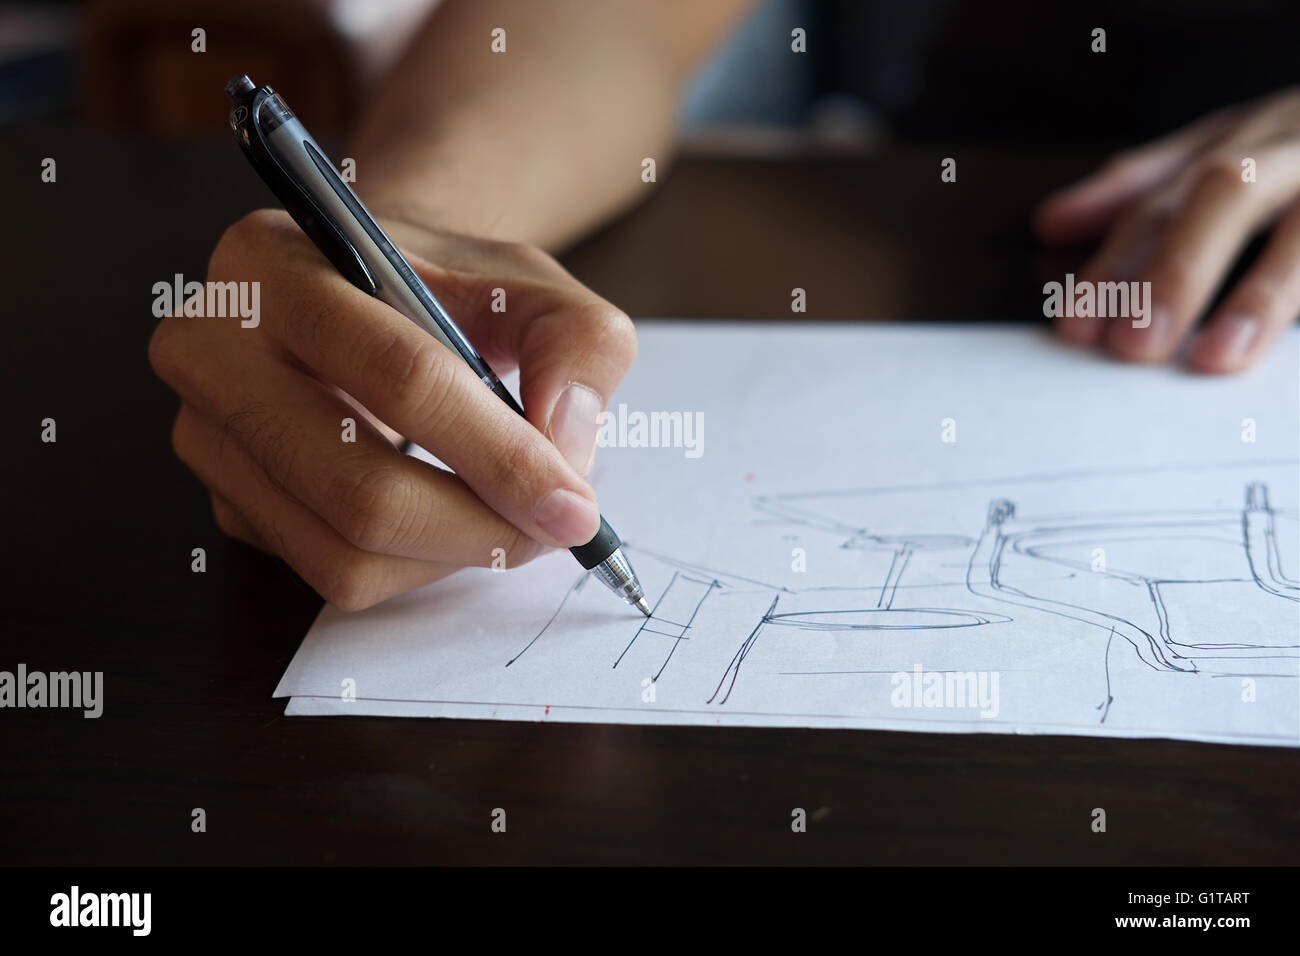 Hand of designer with his pen, designing and sketching his idea on sketchbook Stock Photo